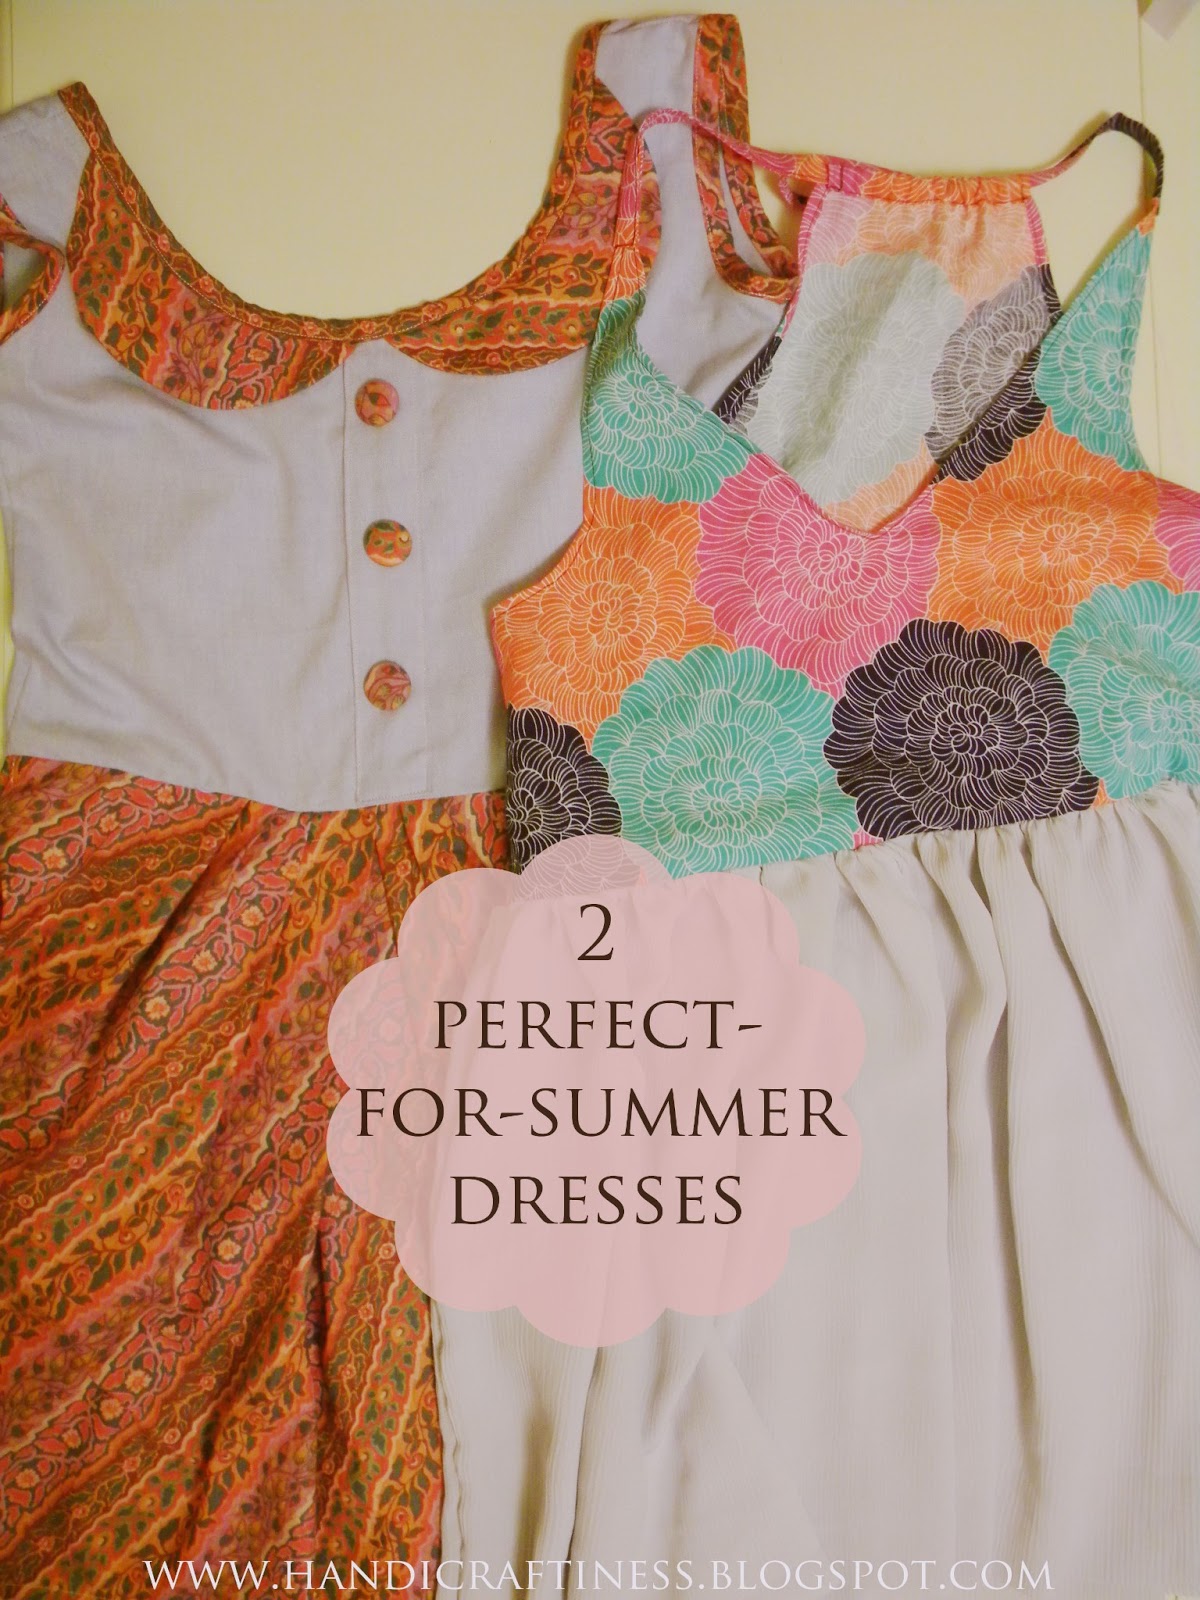 The Pretty Kitty Studio : Summer Dresses - Two Ways for Two Teens